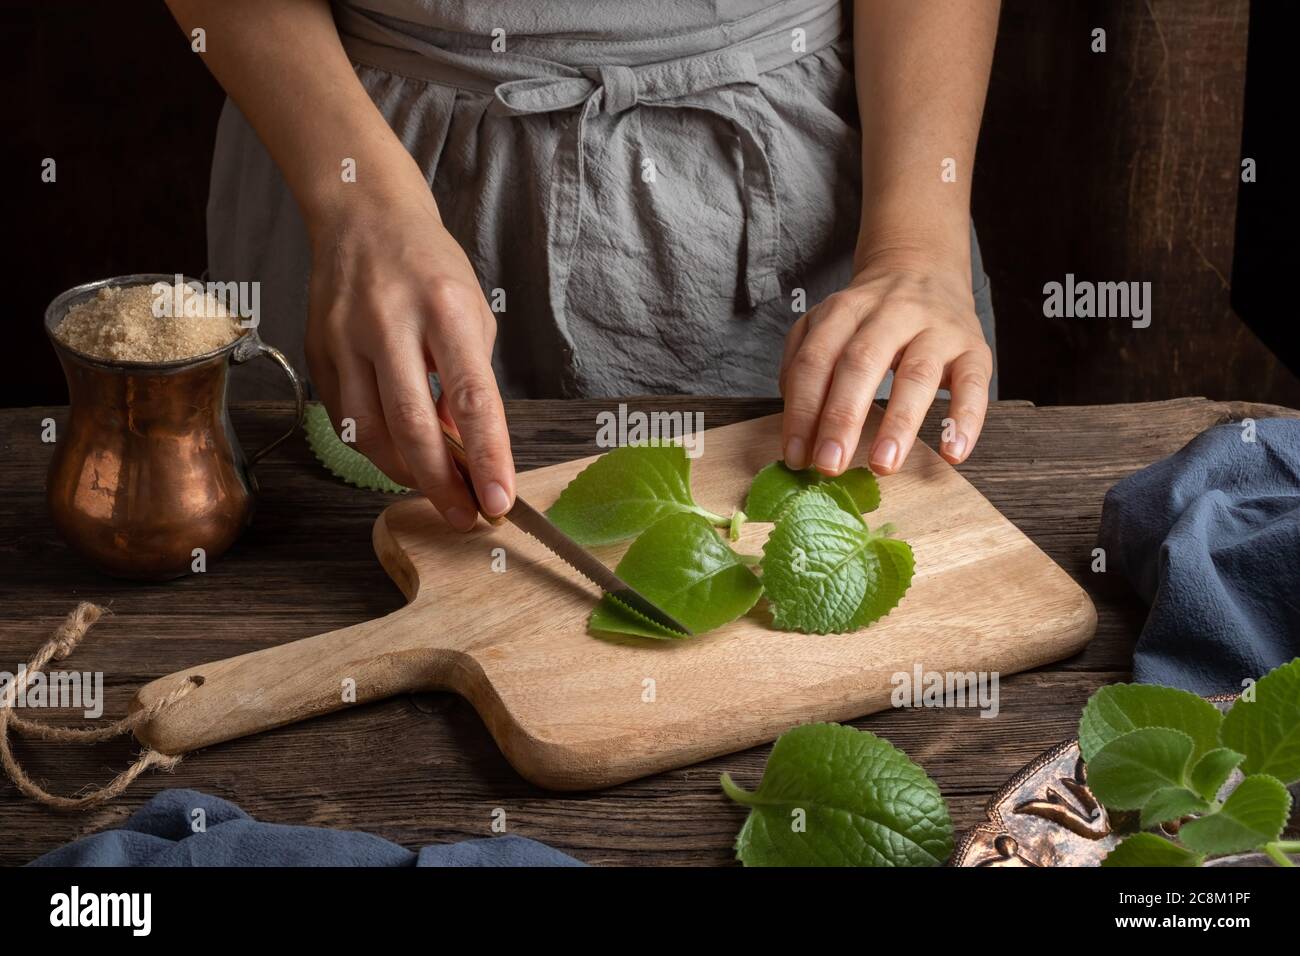 Preparation of a homemade herbal syrup against common cold from silver spurflower and cane sugar - cutting up the leaves Stock Photo